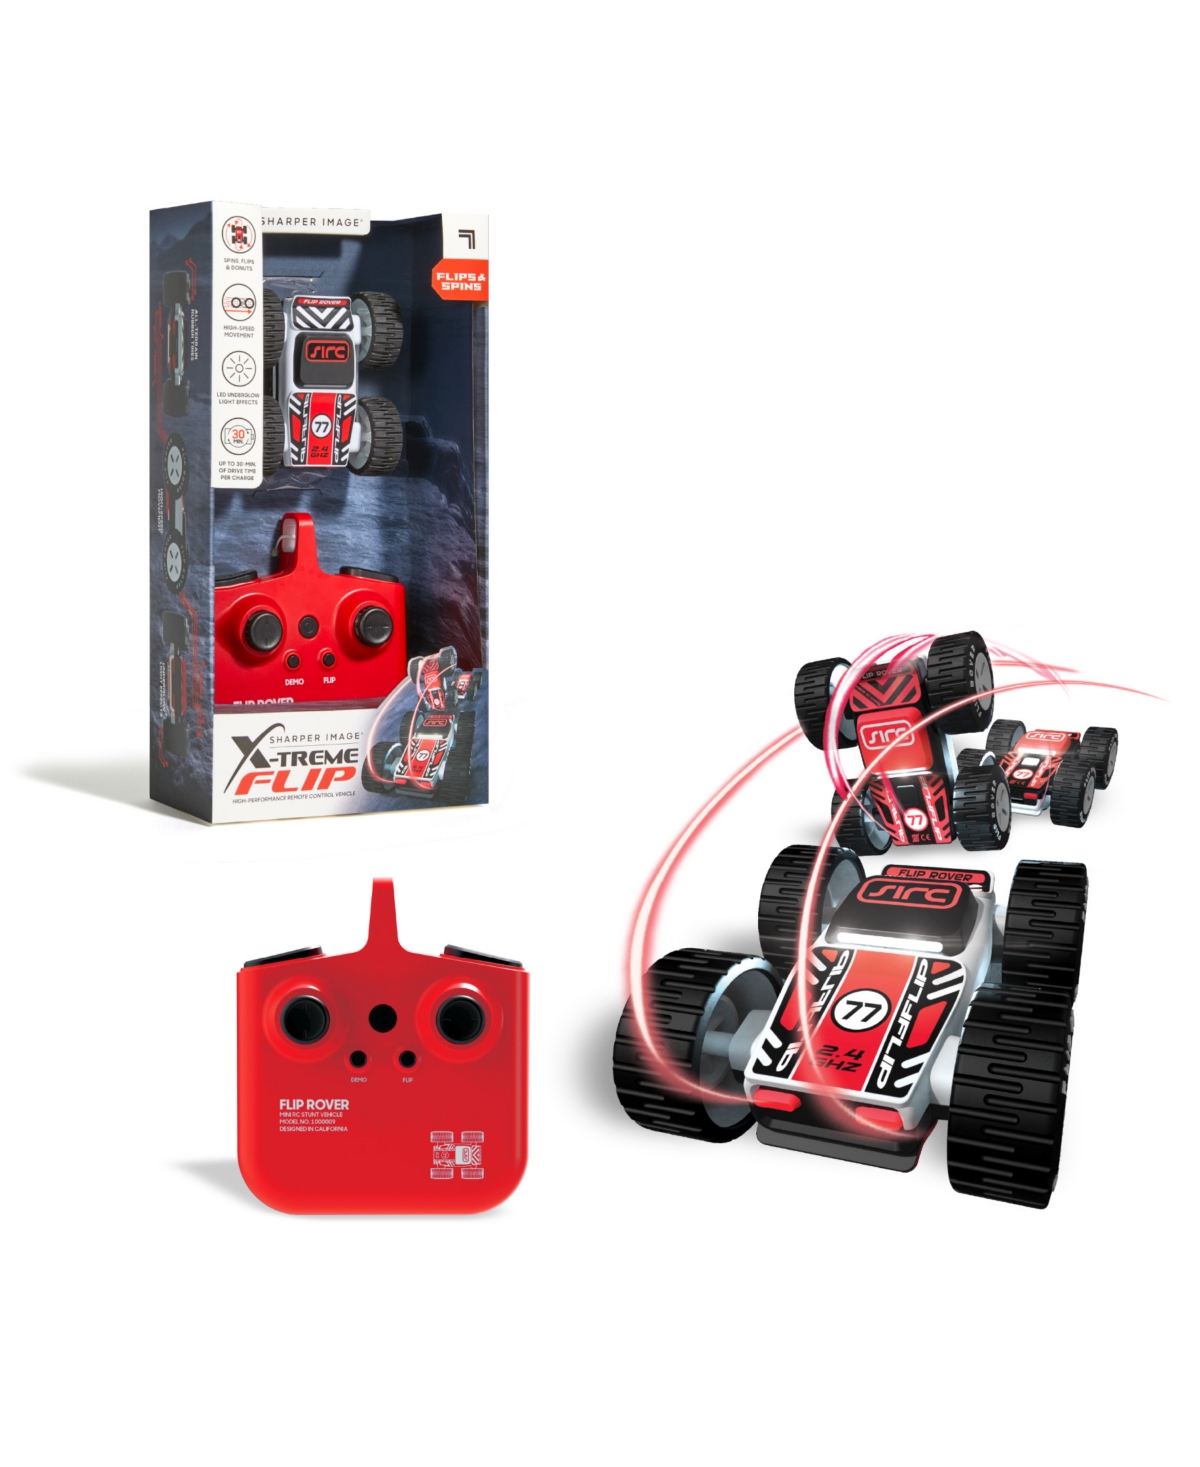 Sharper Image X-treme Flip High-performance Remote Control Vehicle In Red